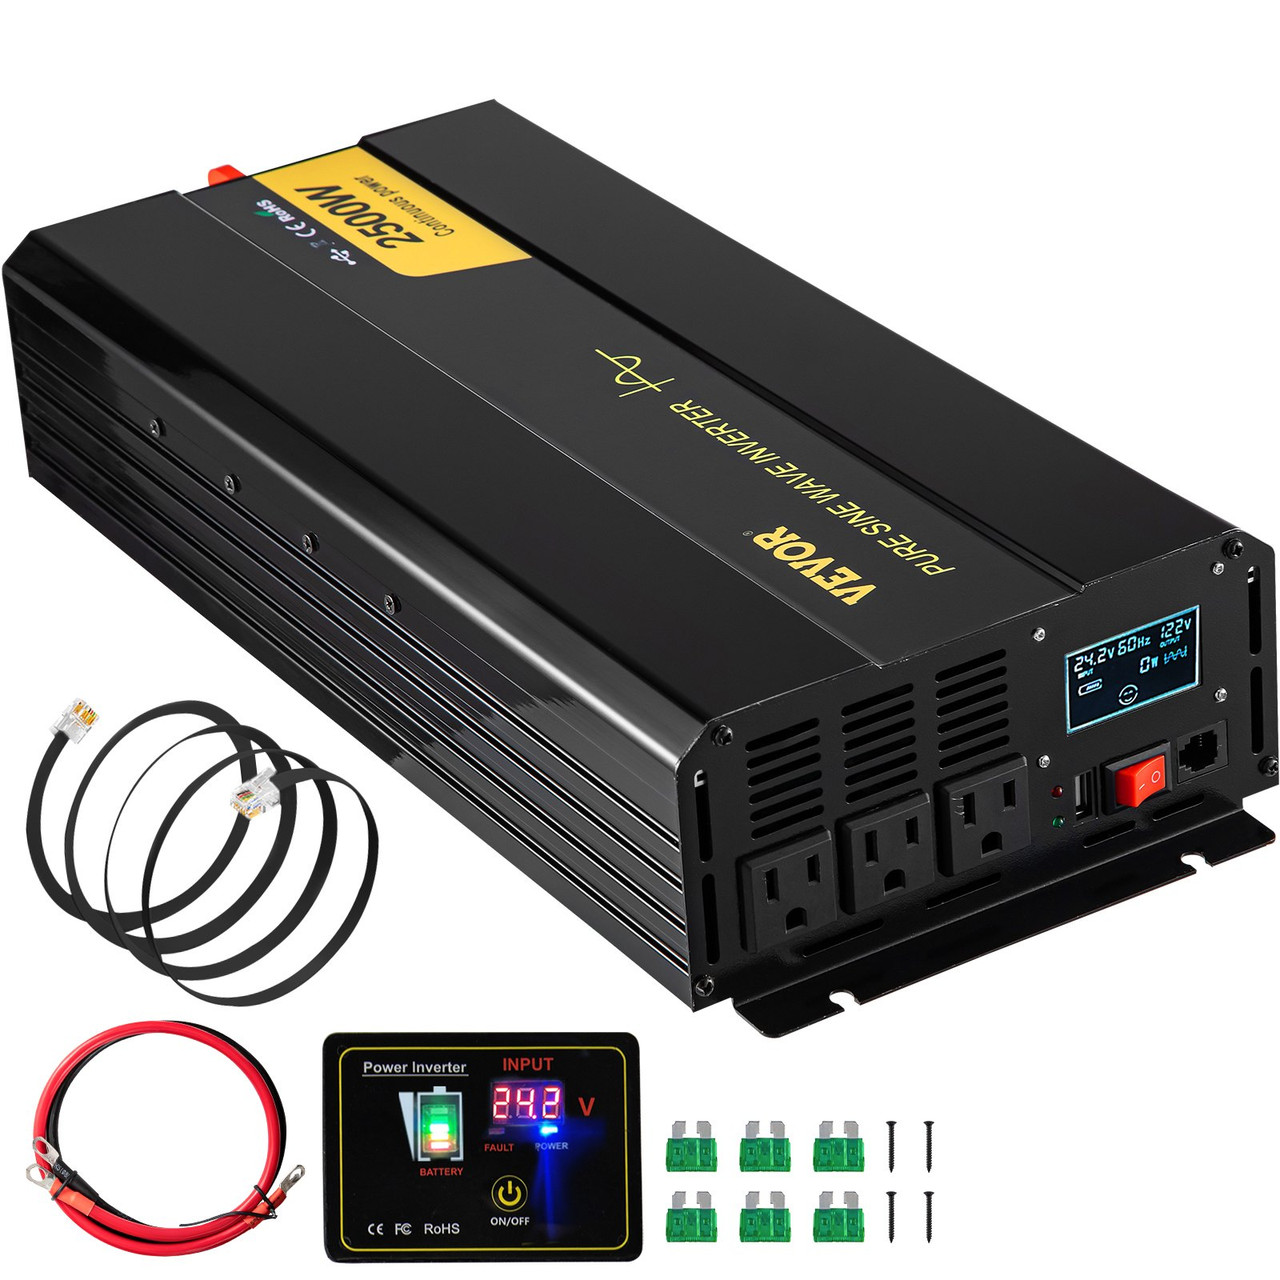 Pure Sine Wave Inverter, 2500 Watt Power Inverter, DC 24V to AC 120V Car Inverter, with USB Port, LCD Display, and Remote Controller Power Converter, for RV Truck Car Solar System Travel Camping